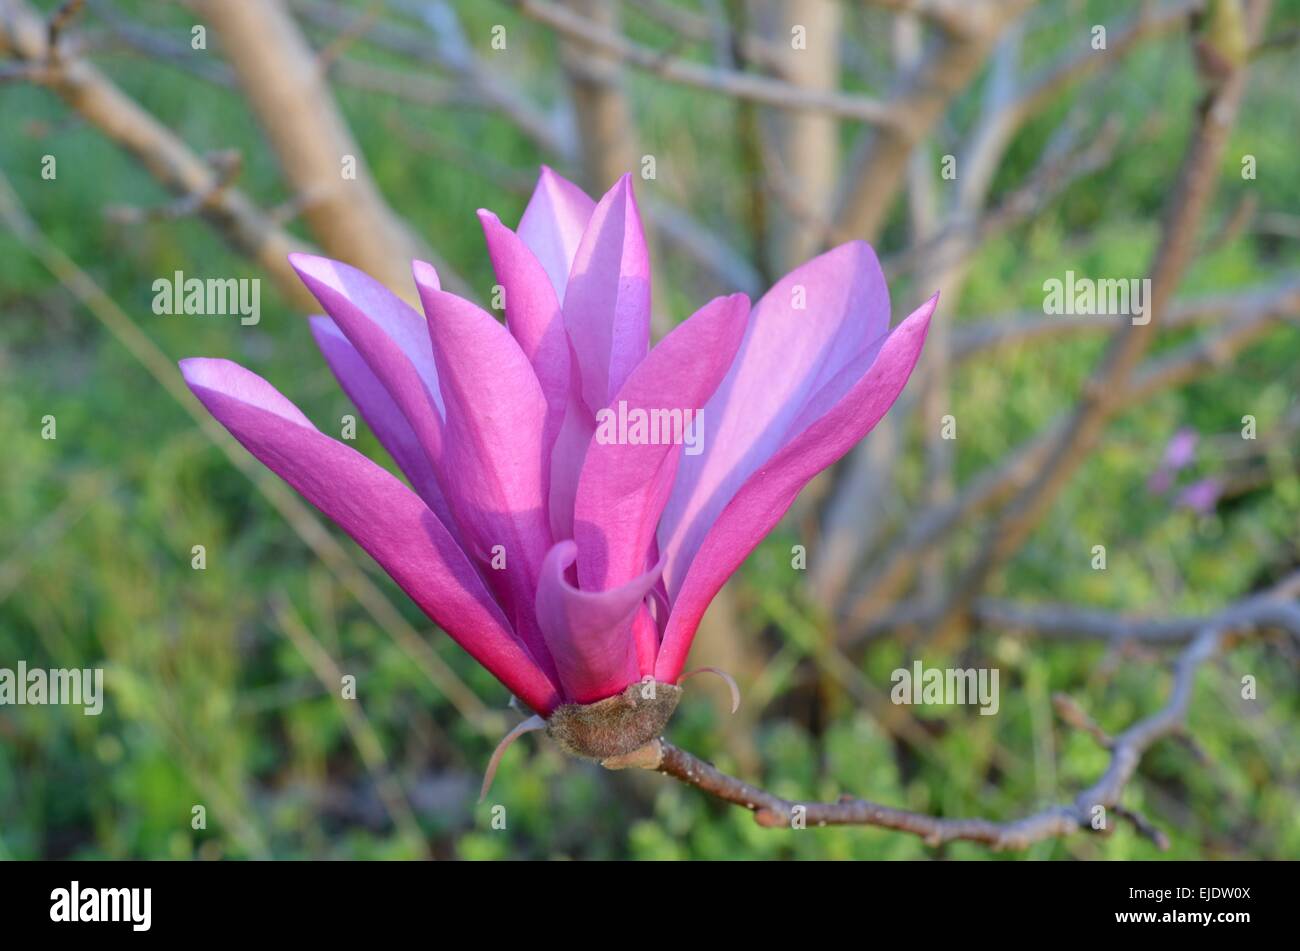 Beautiful pink bloom of a flowering magnolia pink tulip tree. Colorful nature background of pink petals. Stock Photo